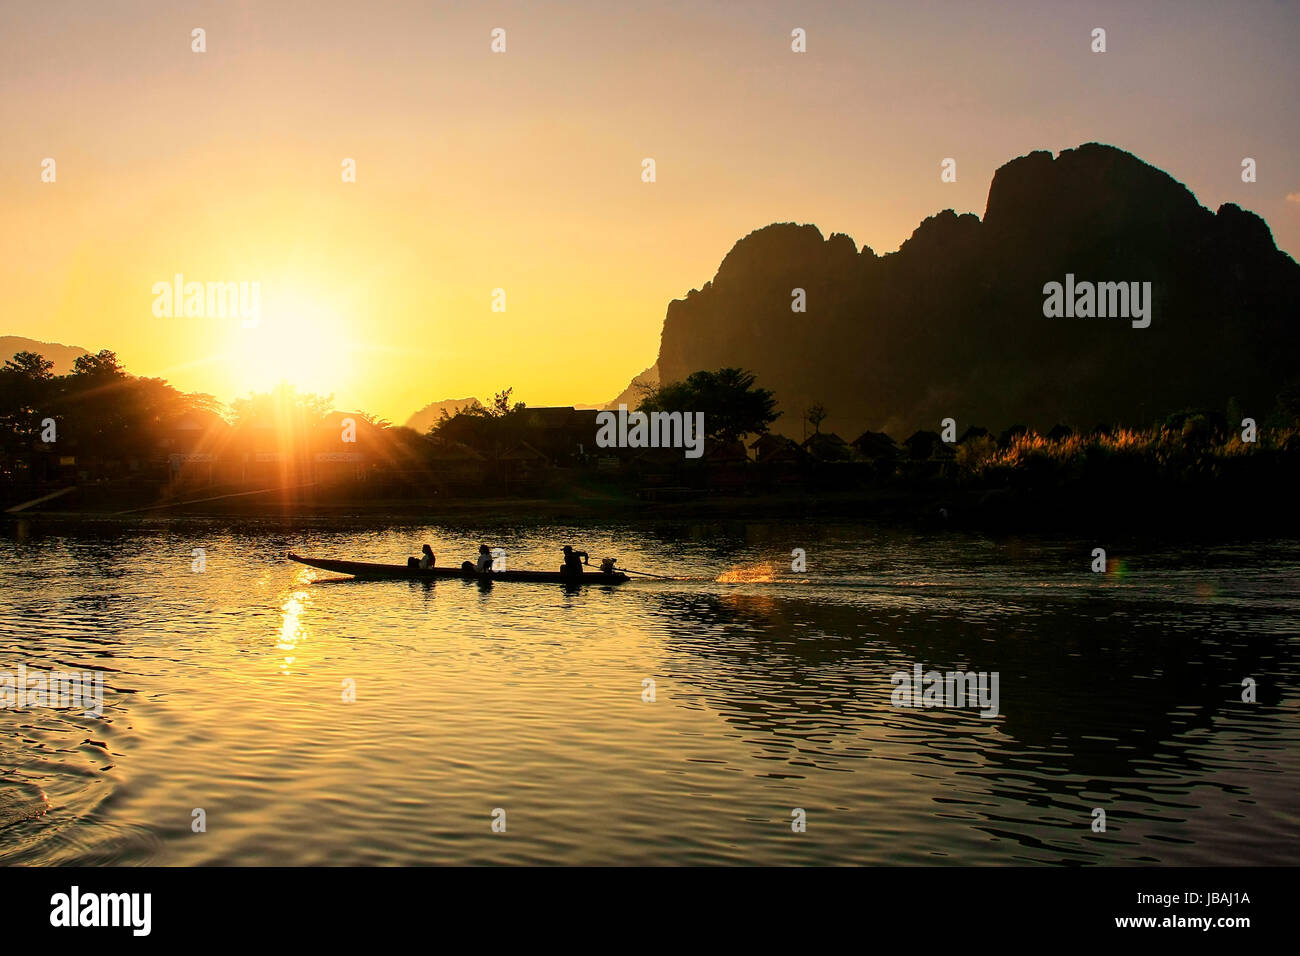 Sunset over Nam Song River with silhouetted rock formations and a boat in Vang Vieng, Laos. Vang Vieng is a popular destination for adventure tourism  Stock Photo